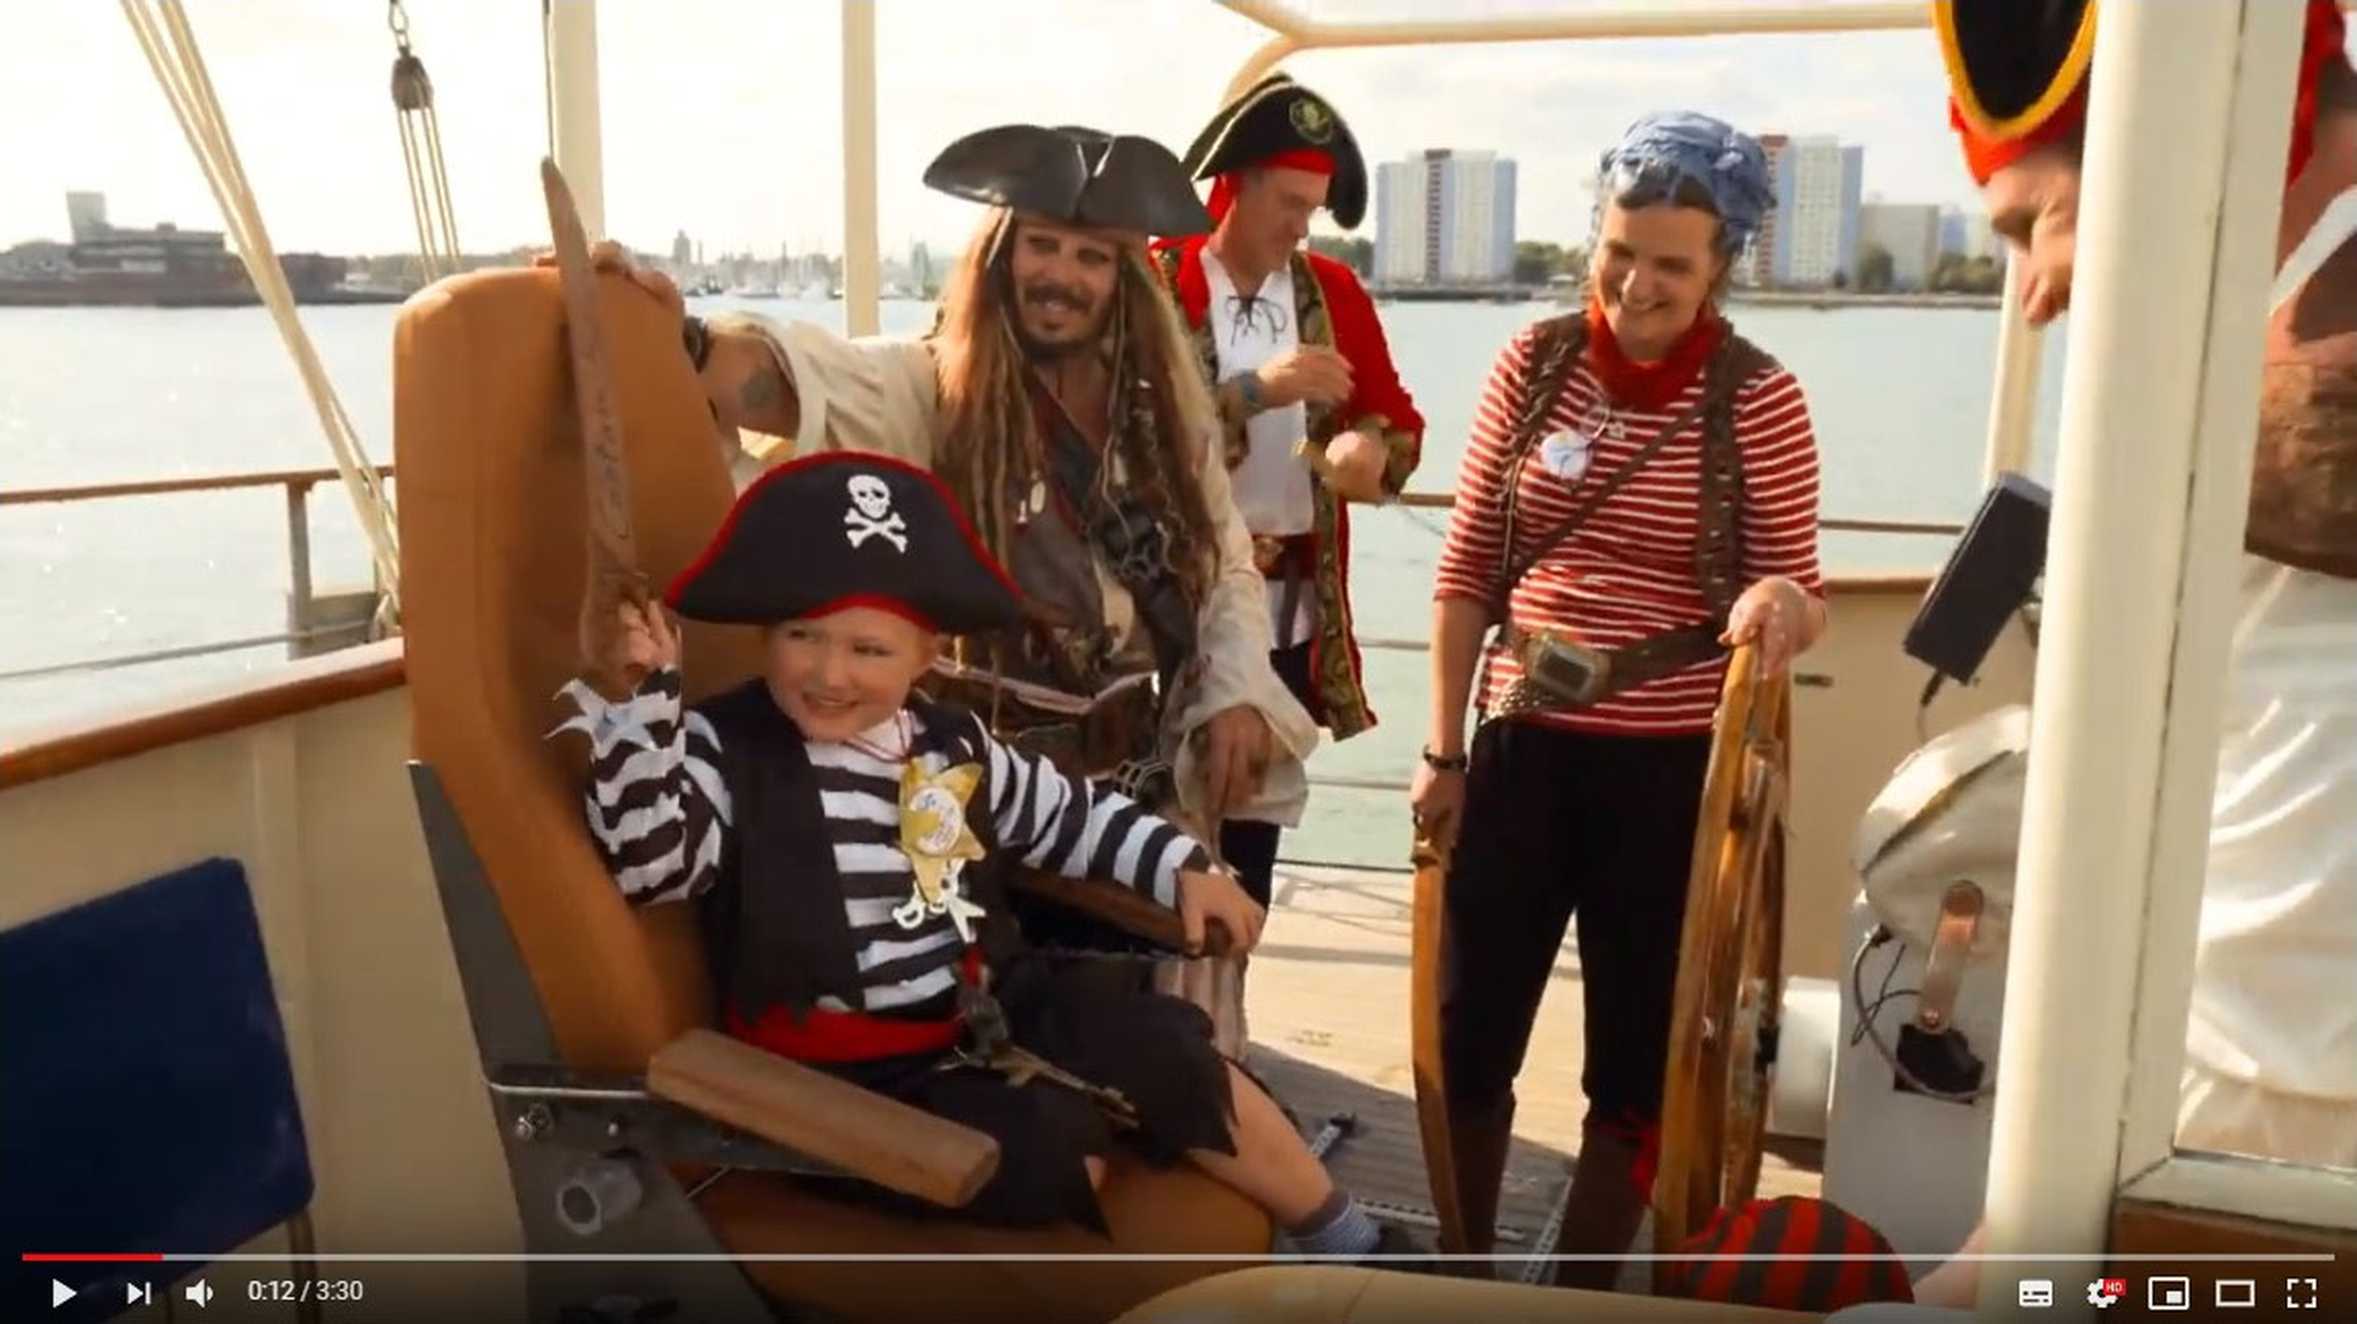 Sebbie and his family on the pirate ship during his wish to have a pirate party